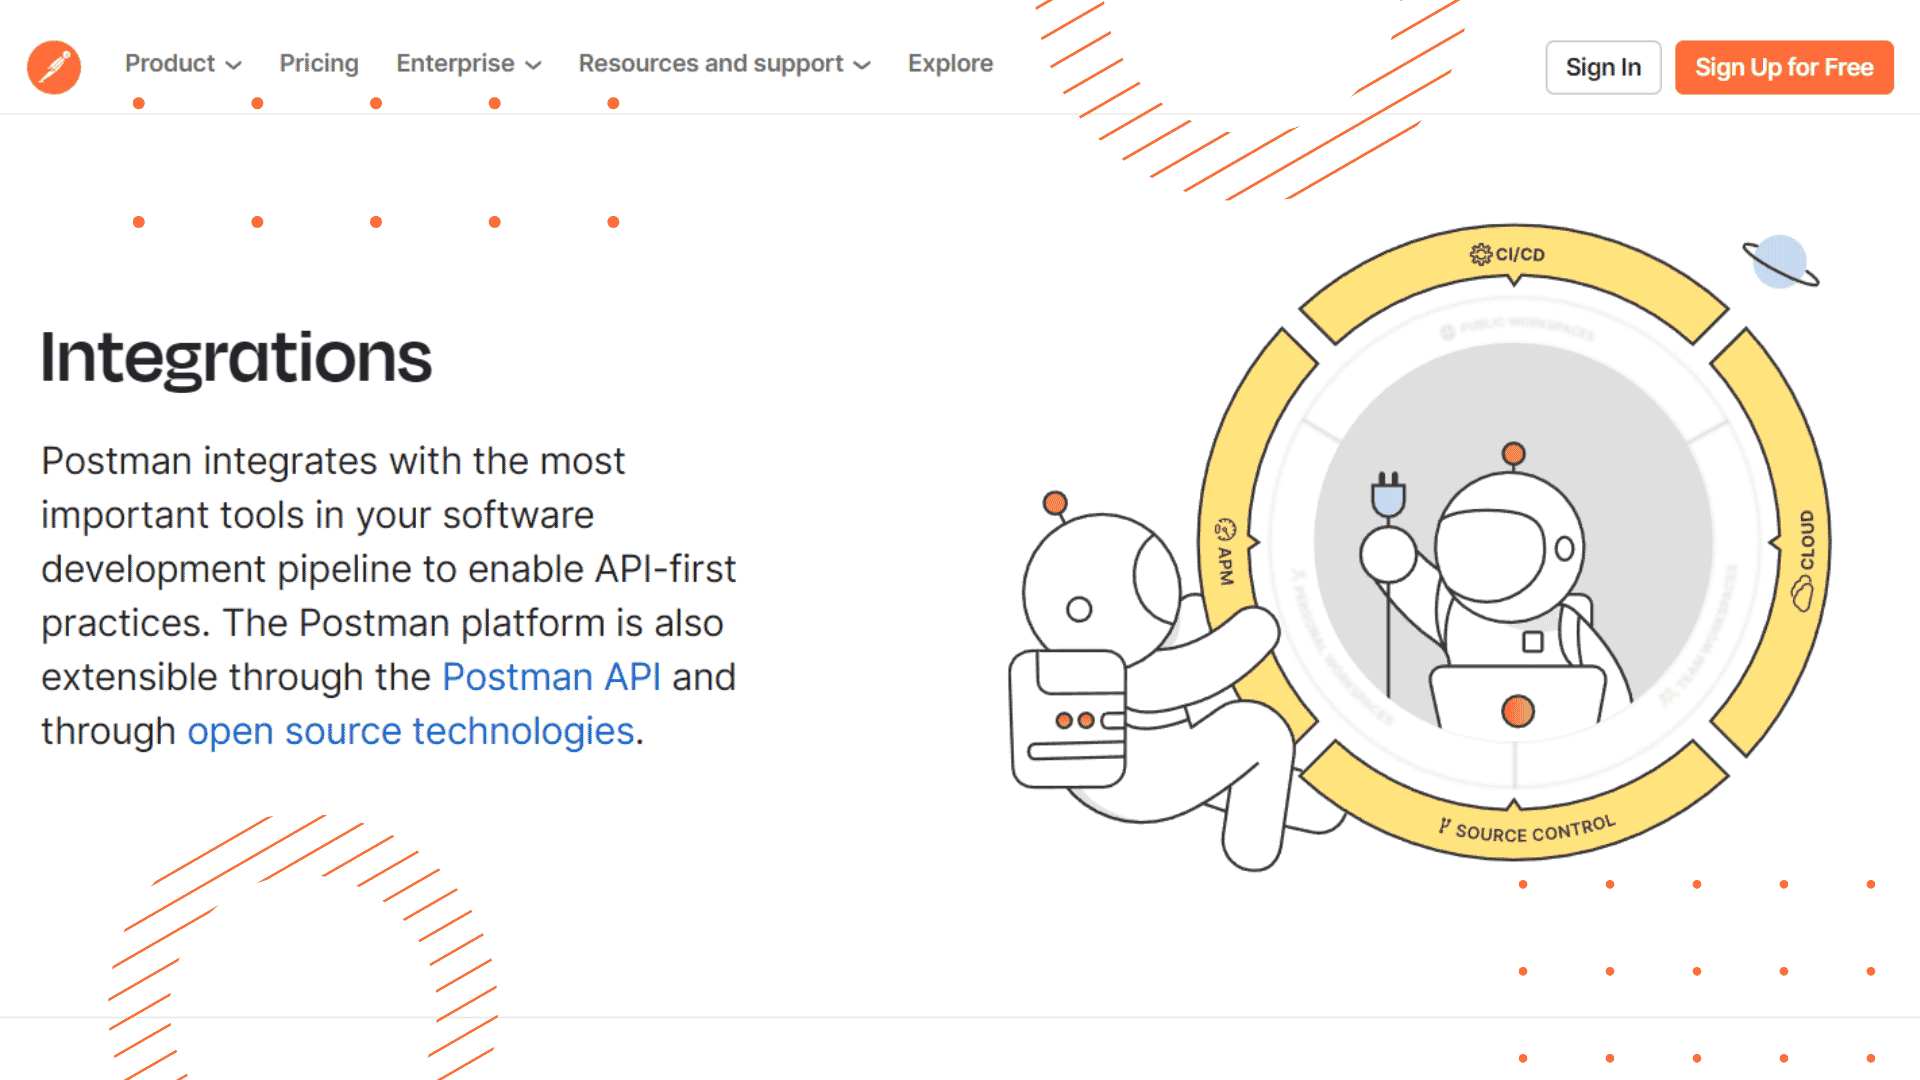 Key Features - Extensive support for APIs